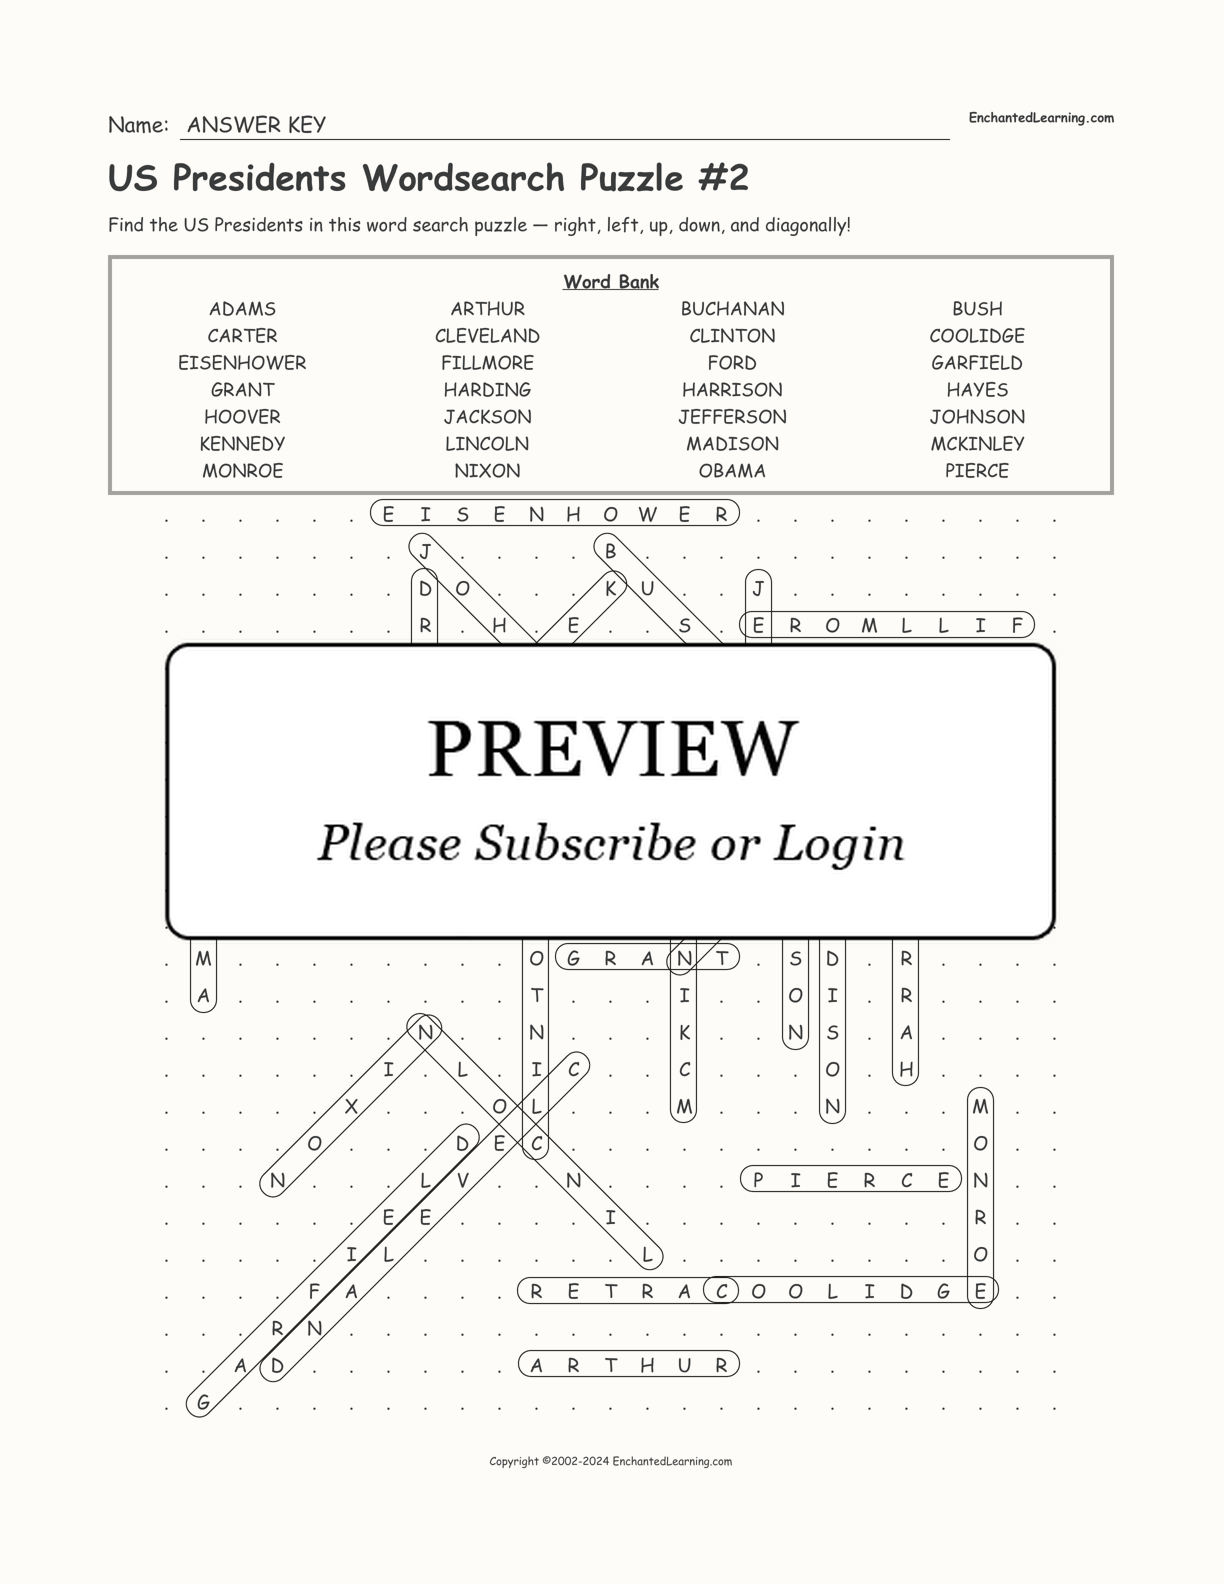 US Presidents Wordsearch Puzzle #2 interactive worksheet page 2